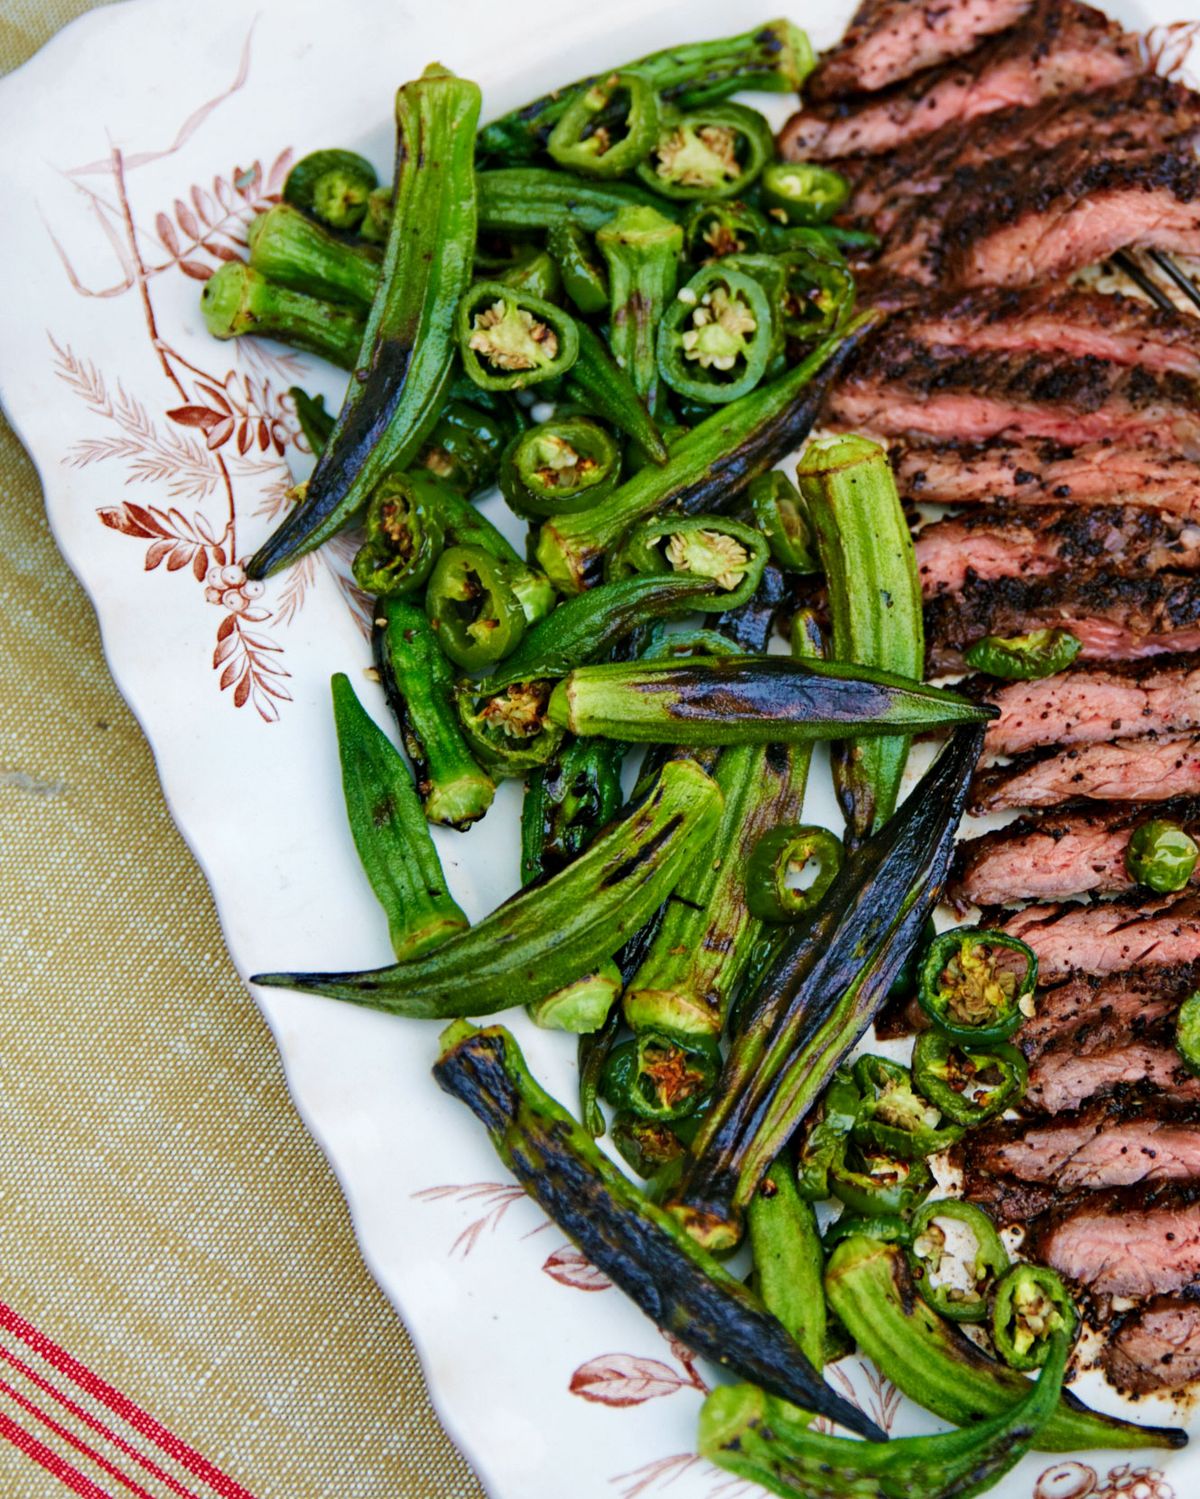 skirt steak and grilled okra